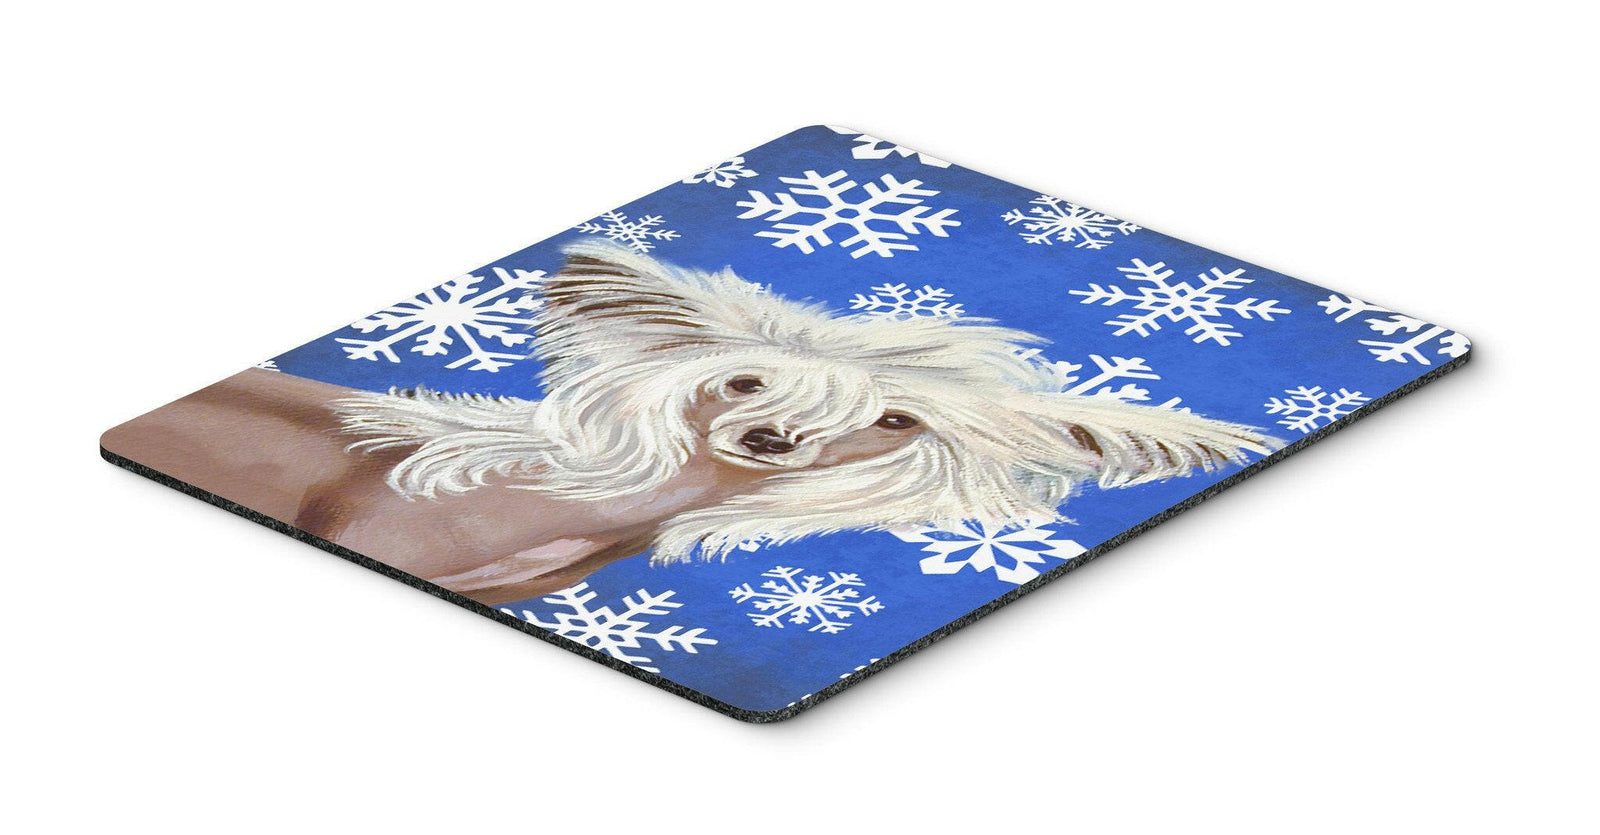 Chinese Crested Winter Snowflakes Holiday Mouse Pad, Hot Pad or Trivet by Caroline's Treasures